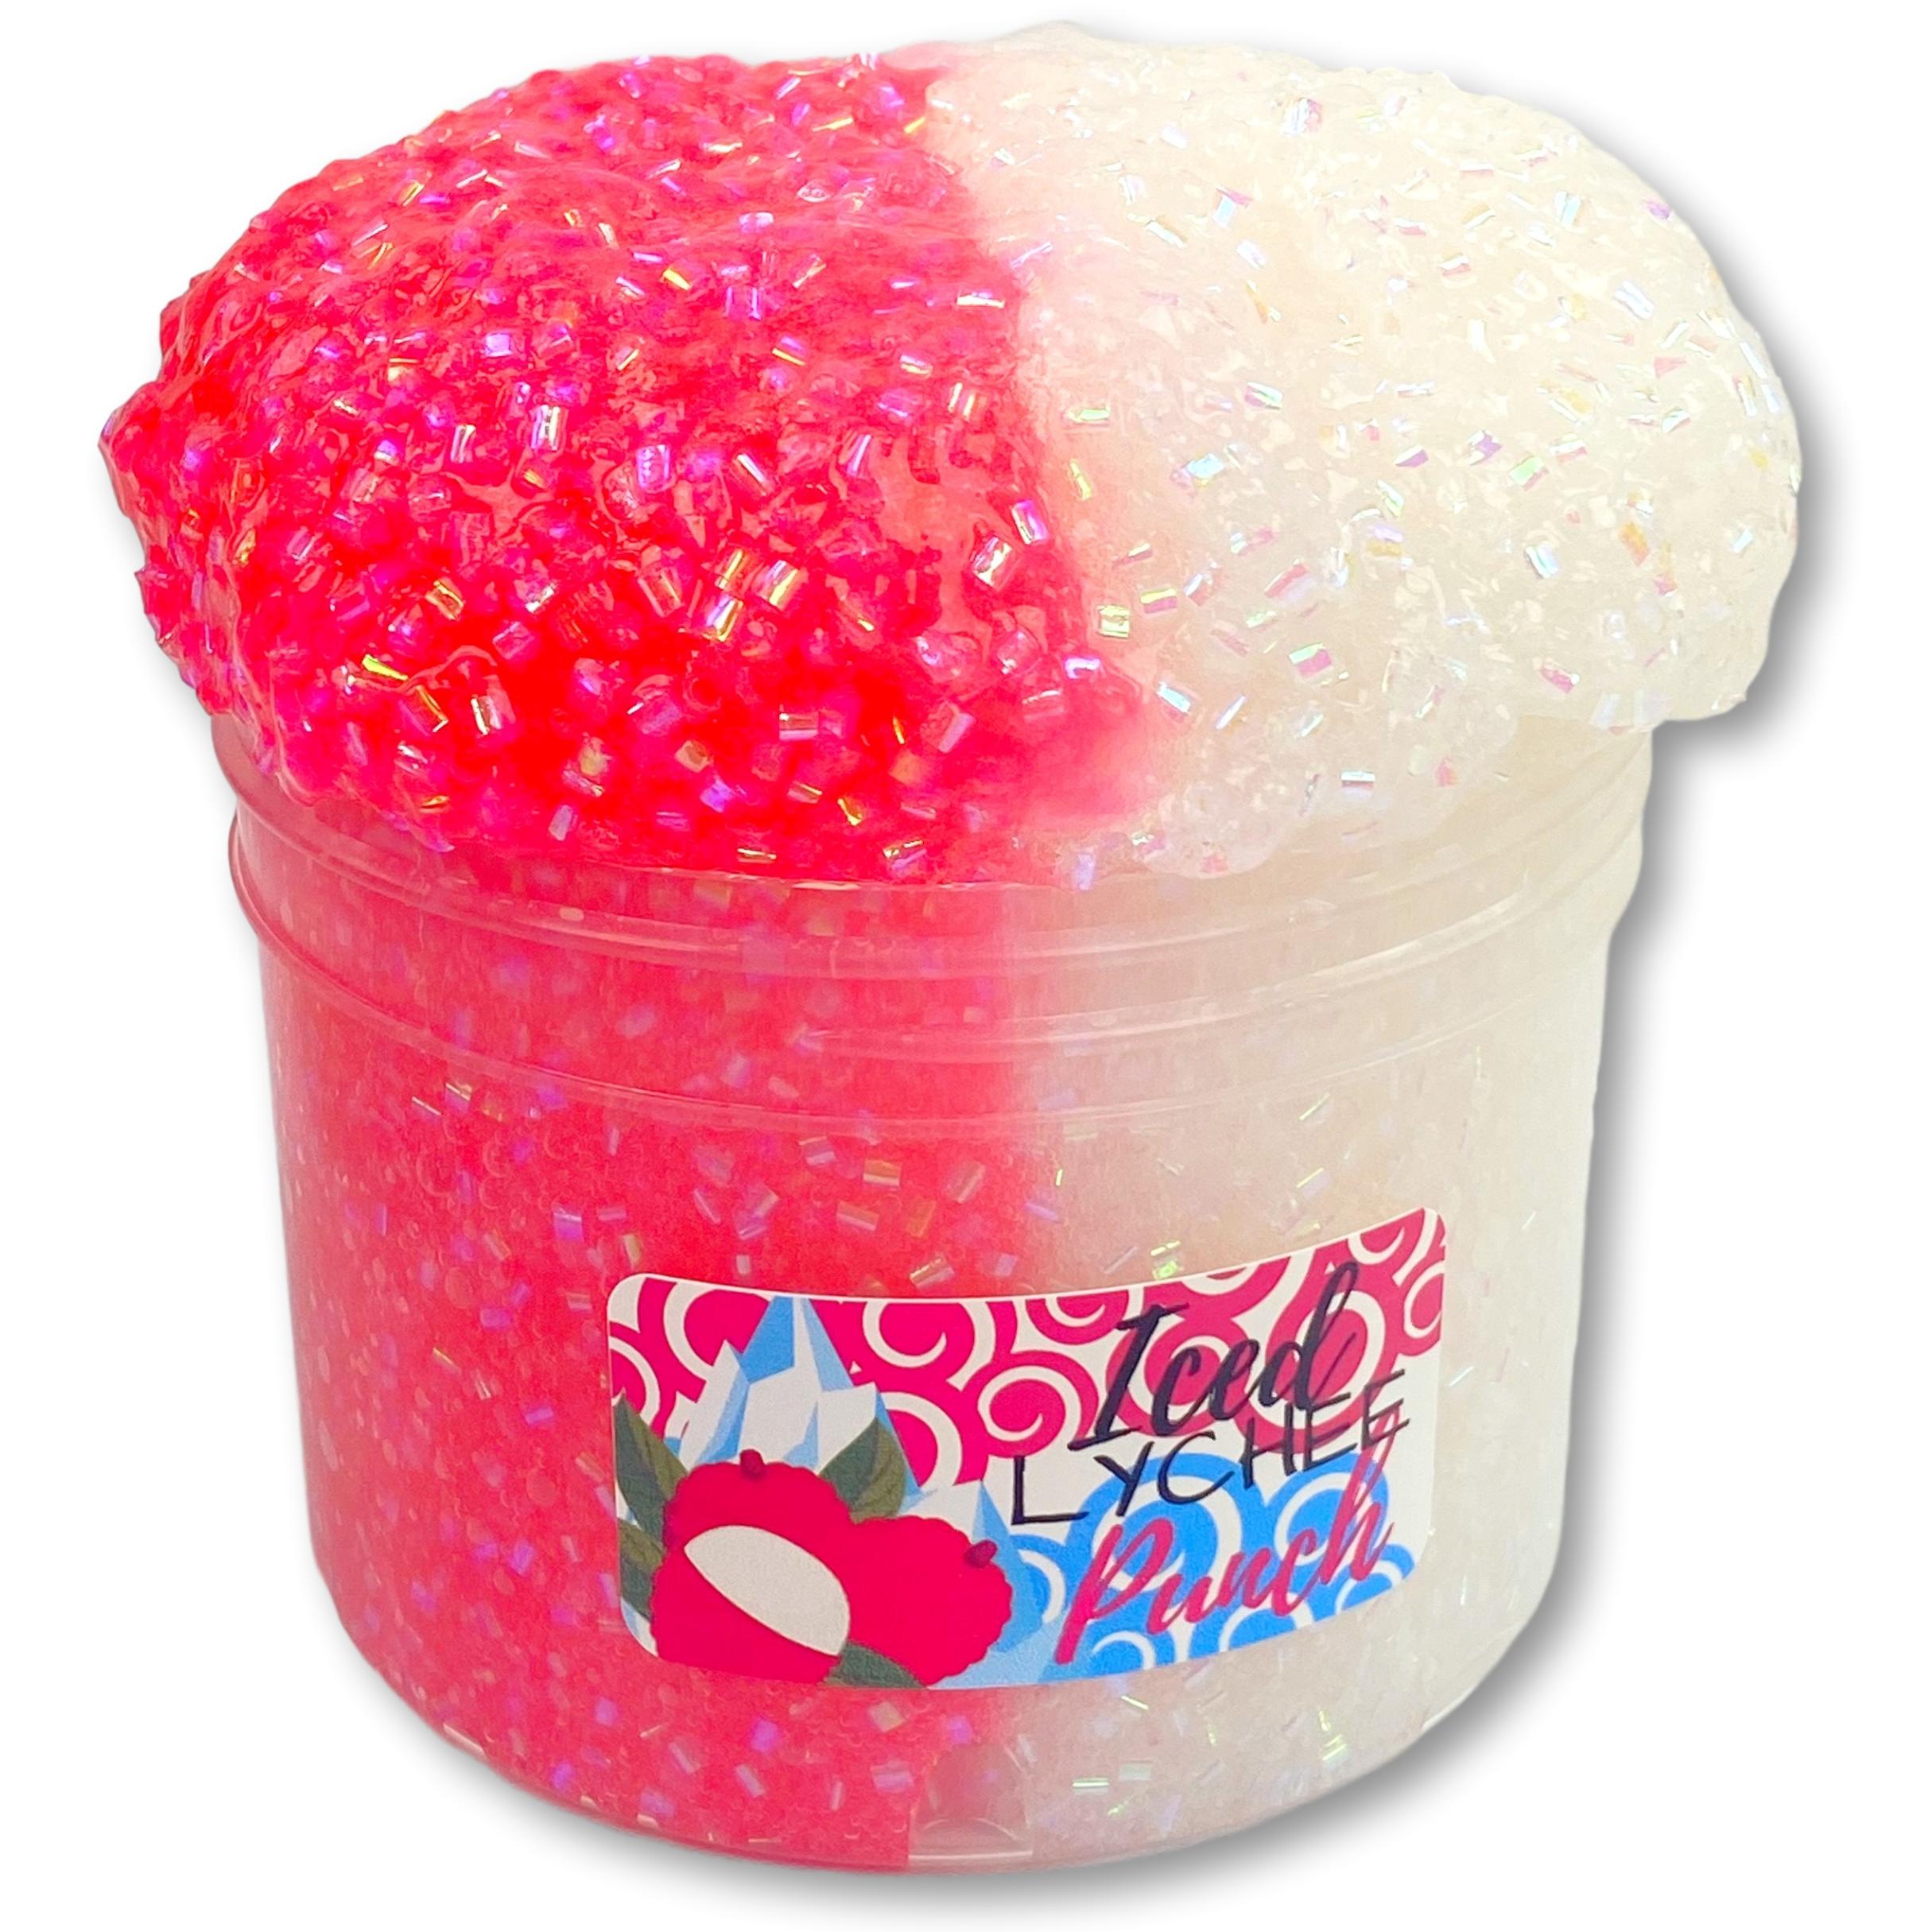 Dope Slimes Lychee Shaved Ice Slime